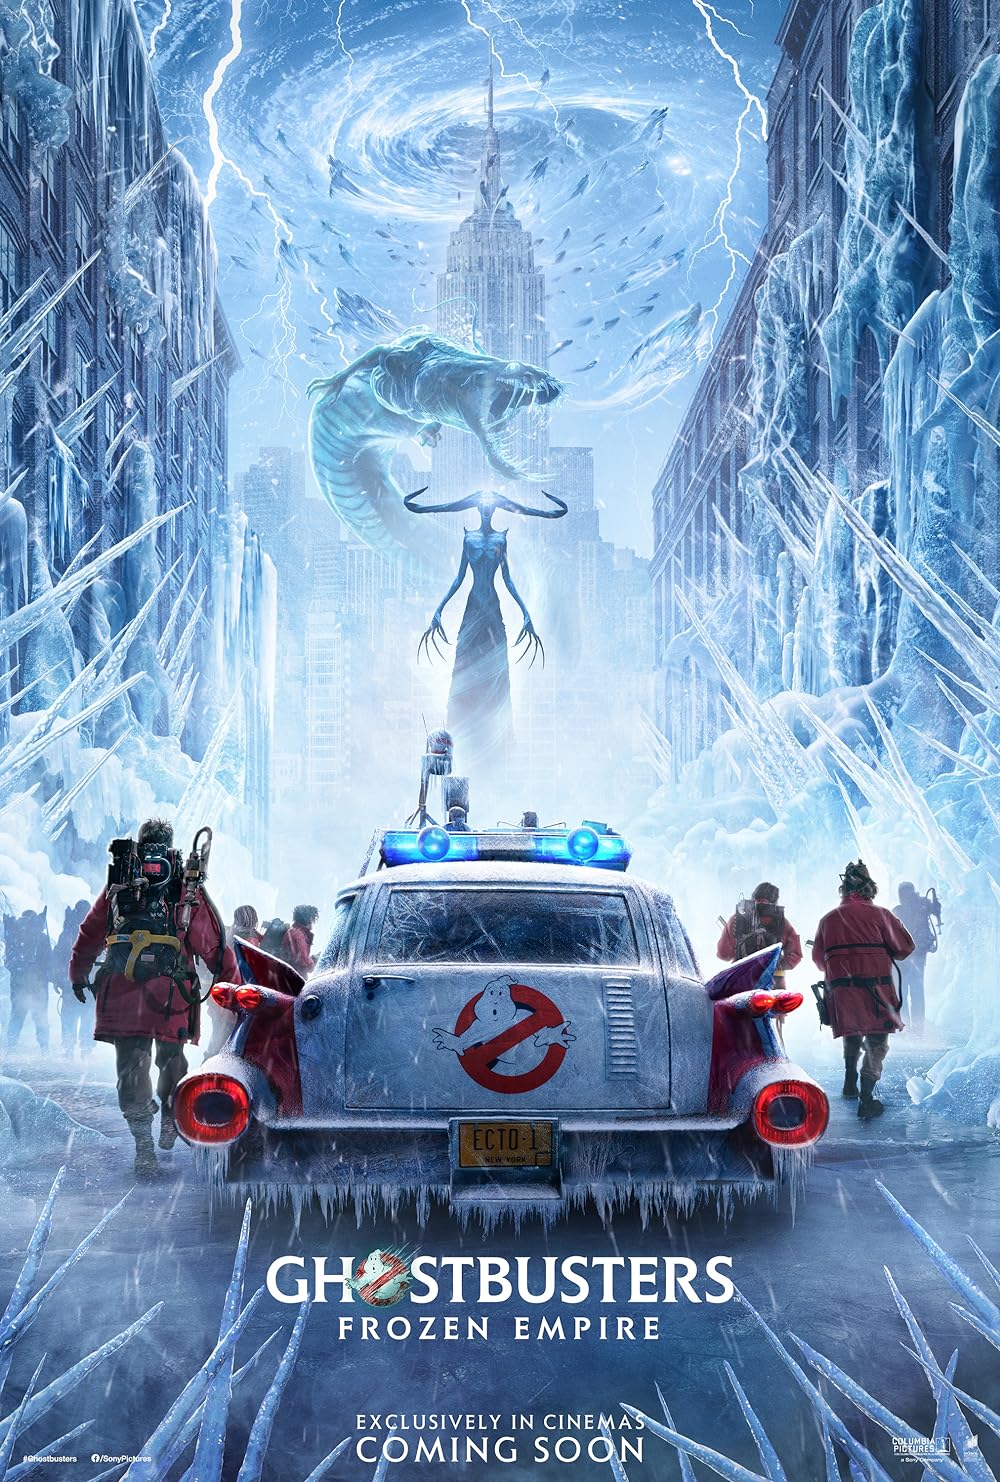 SNL Nerds – Episode 282 – Ghostbusters: Frozen Empire with guest Kevin Israel